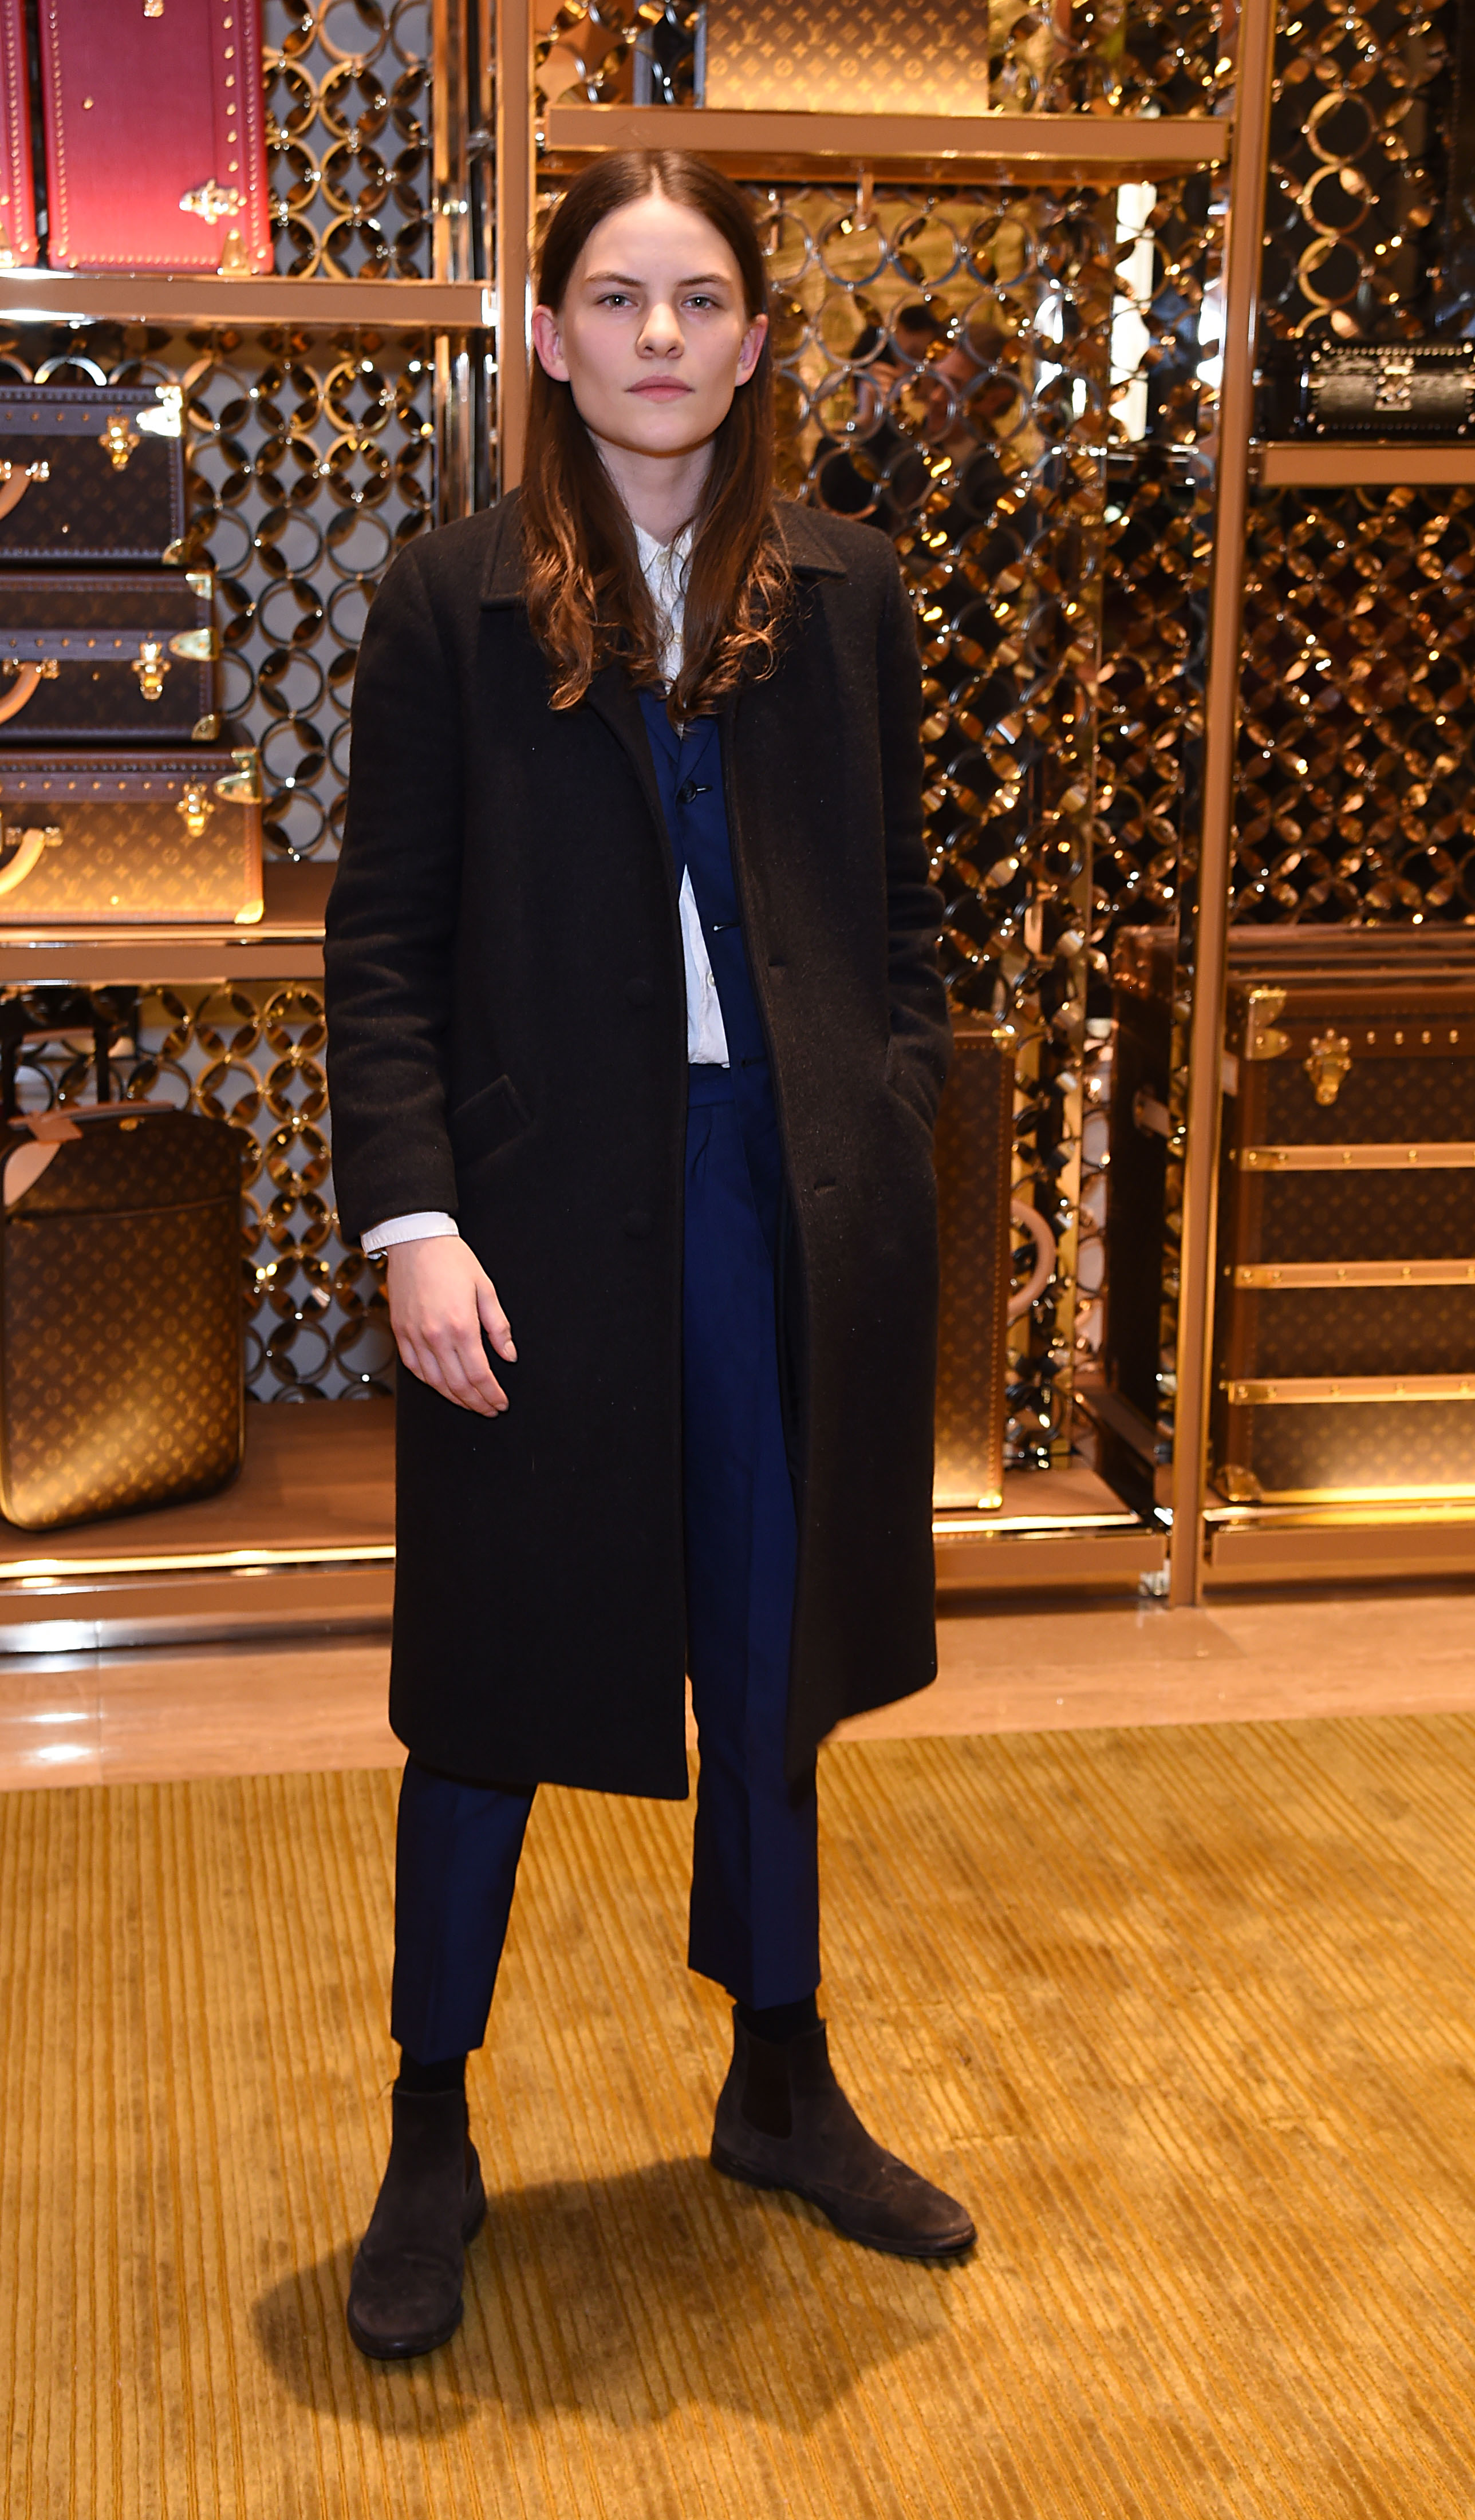 Eliot Sumner attends the Louis Vuitton pre-BAFTA party on February 13, 2016 in London, England | Source: Getty Images